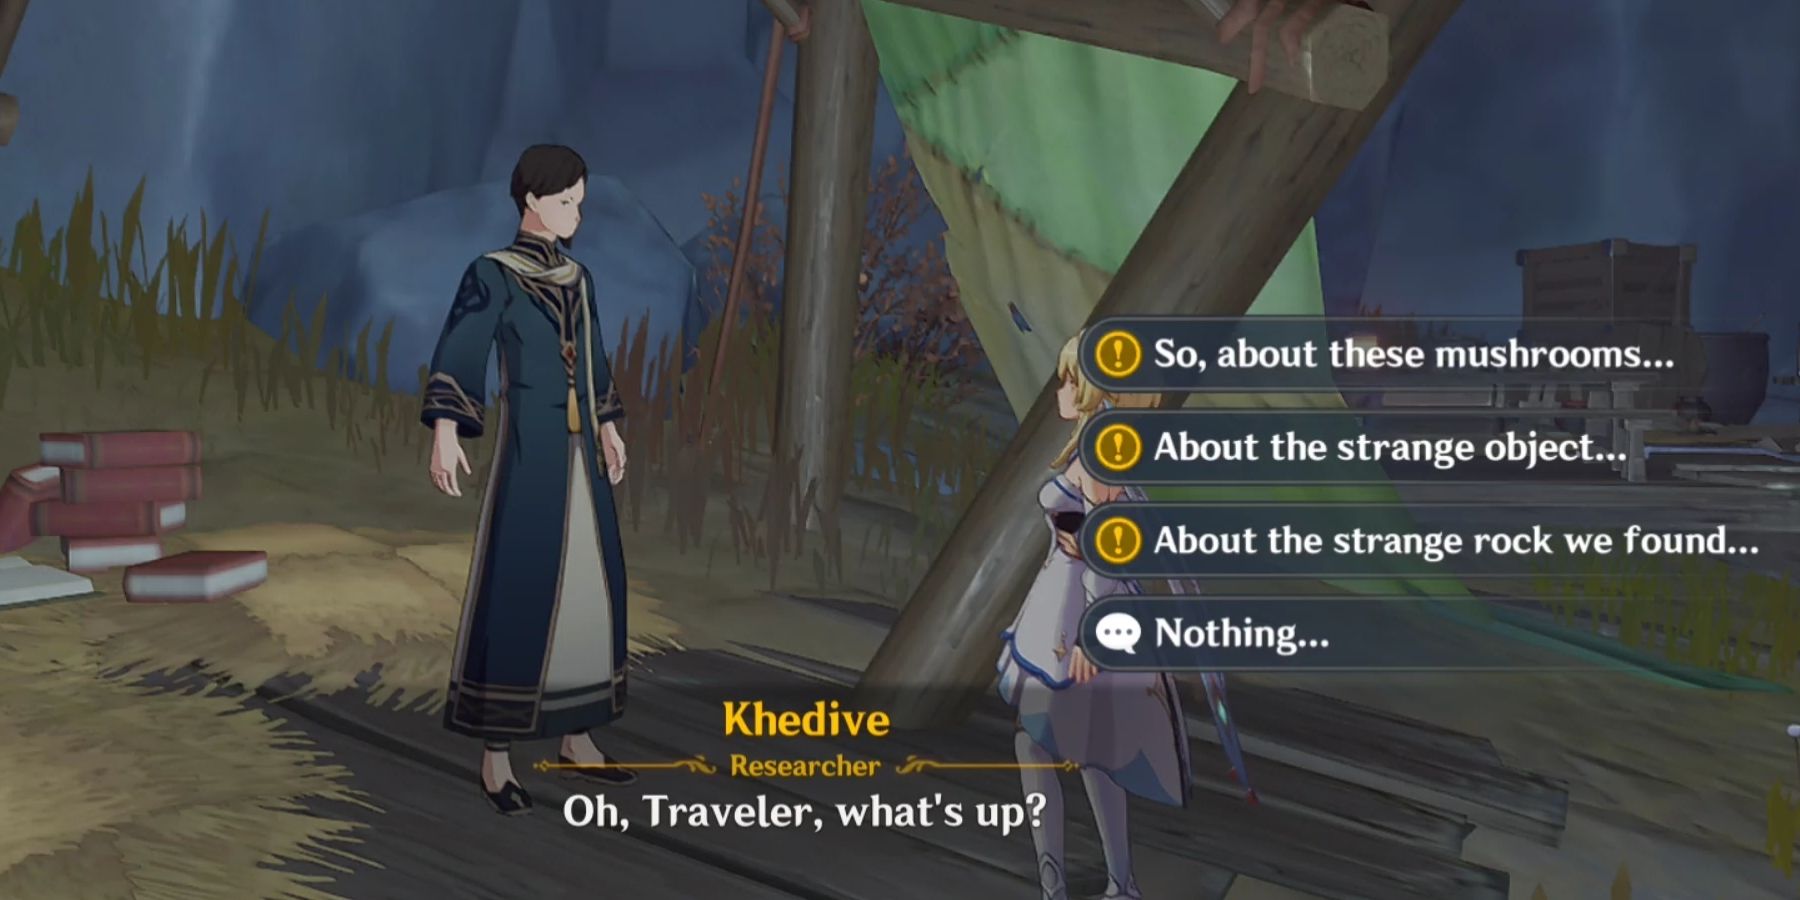 players asking Khedive about the mushrooms in Genshin impact